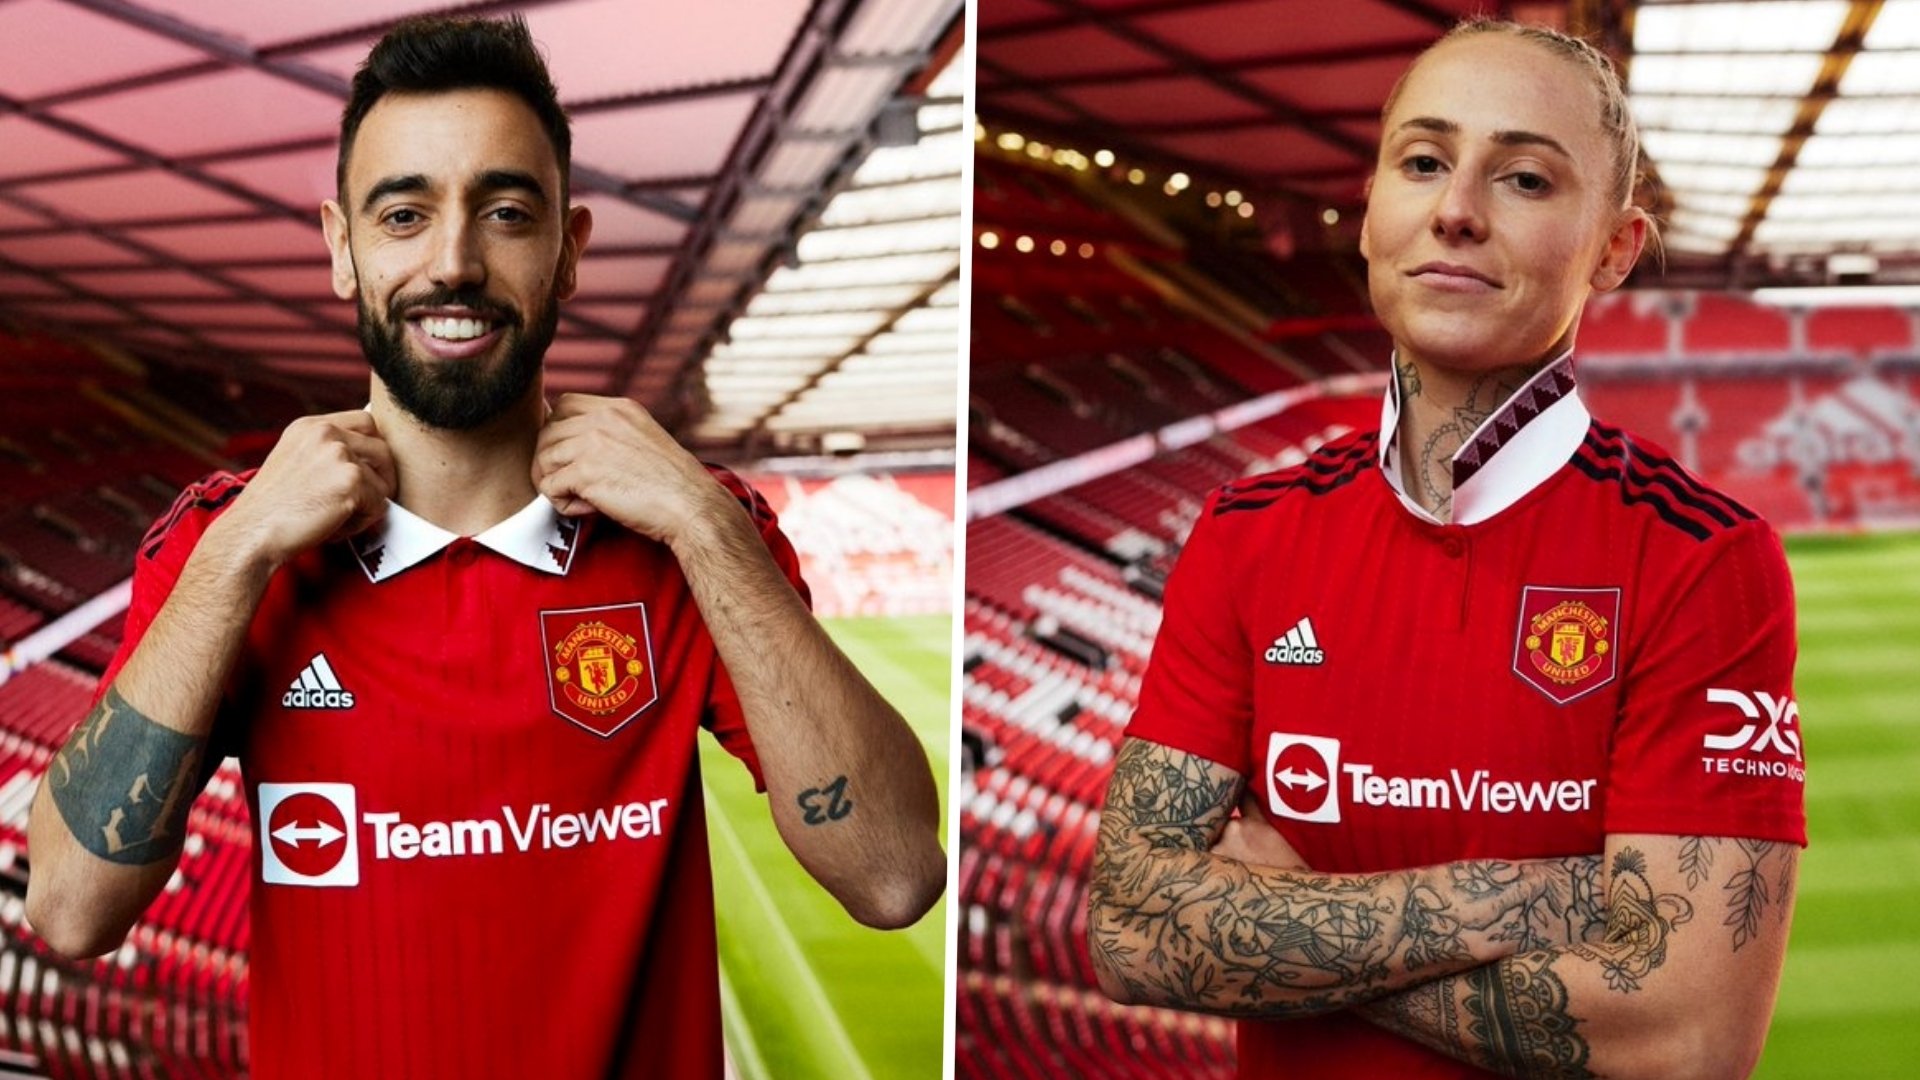 Man Utd Throwback To The 1990s With Release Of Retro Home Kit For 2022 23 Season. Goal.com US